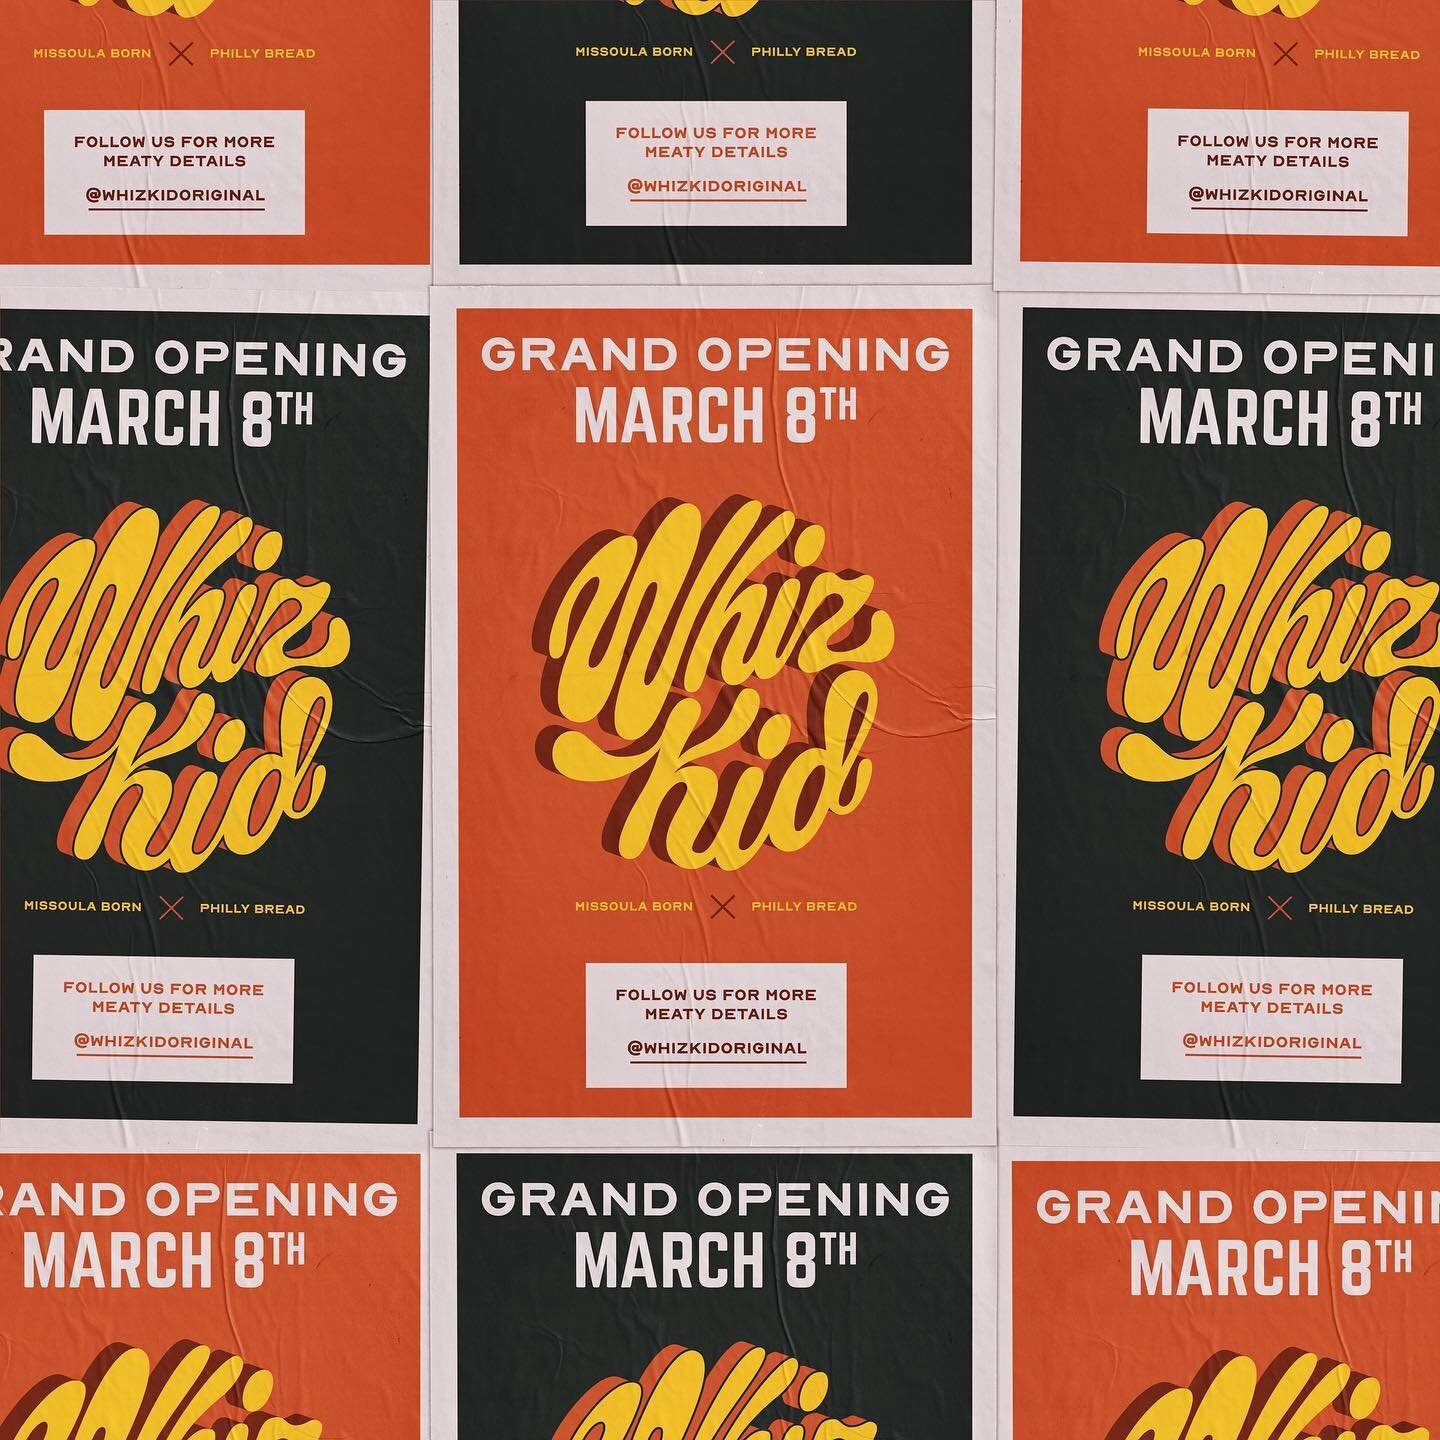 Today&lsquo;s the day! My pals @whizkidoriginal are officially open! Go get a delicious meat sandwich! 
-
Order online through their website or dine in at @goldenrosemt or @localsonlymt.